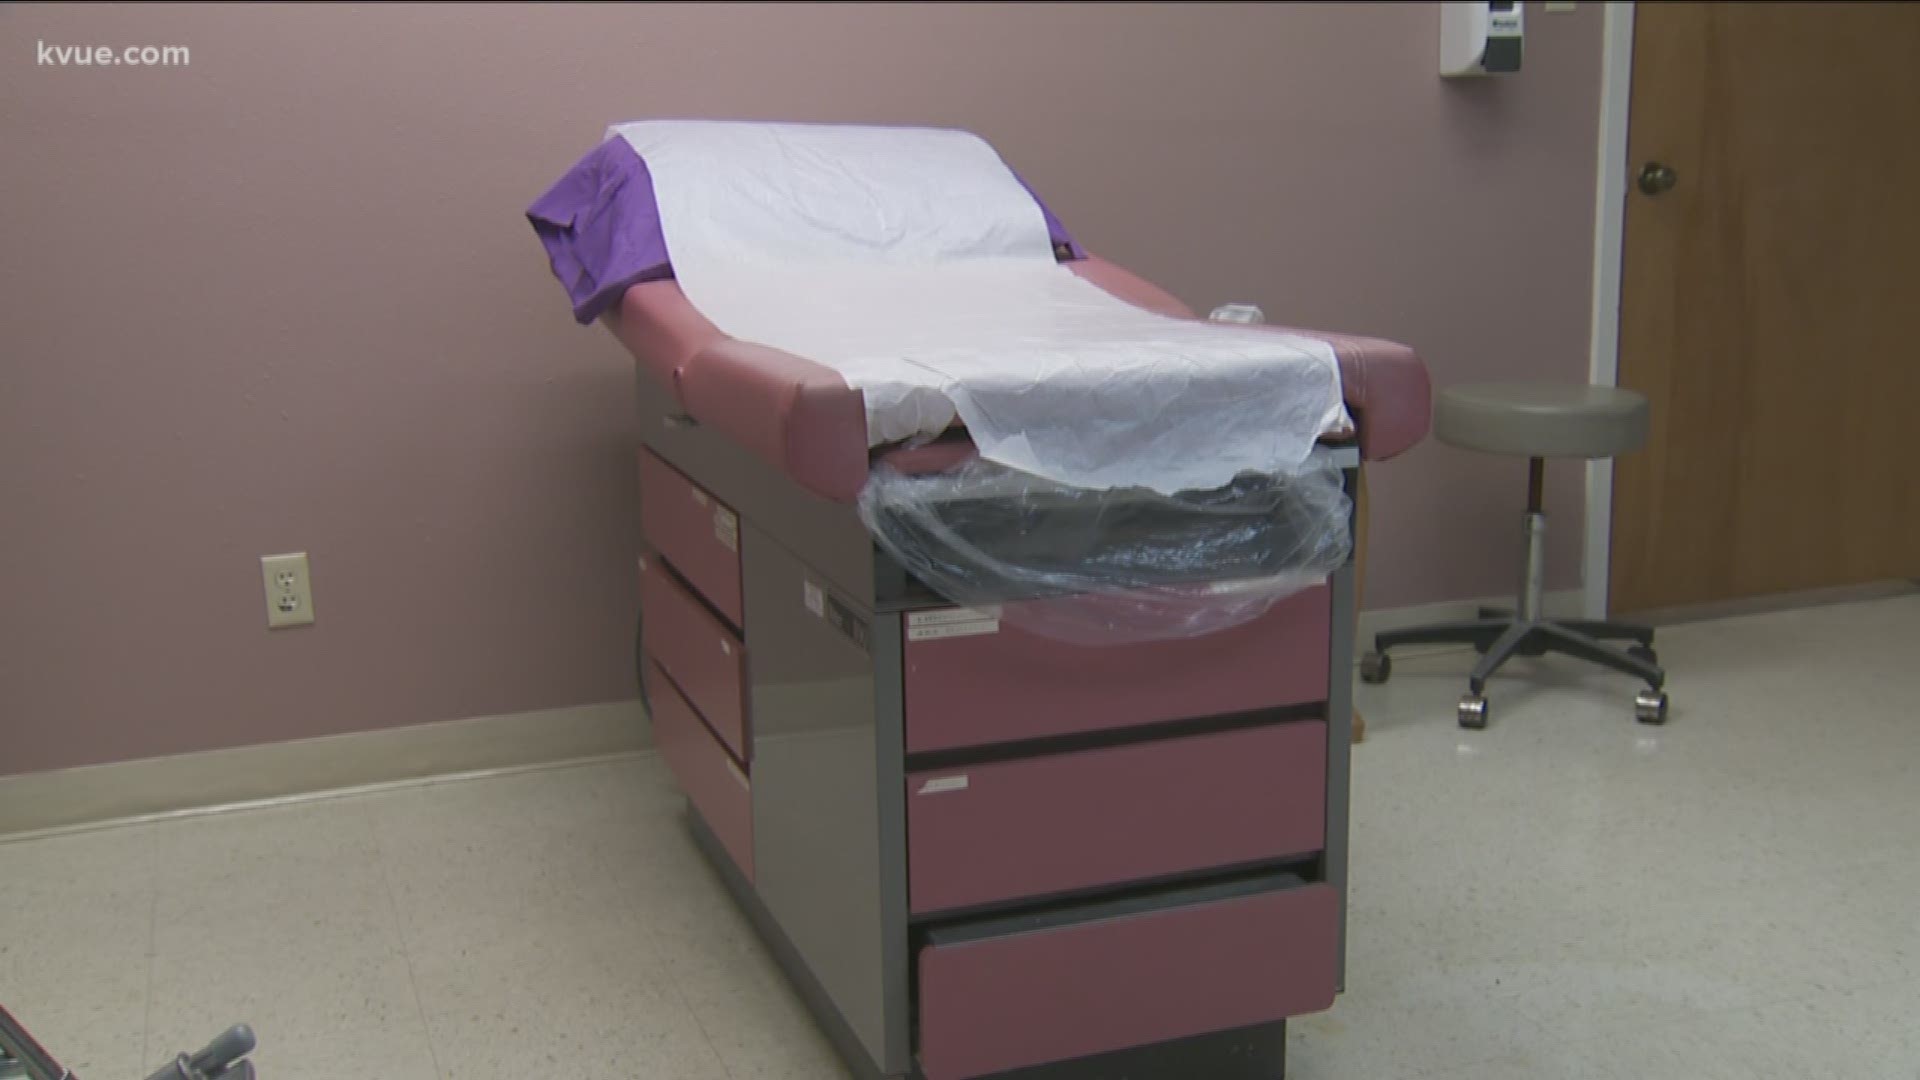 Planned Parenthood clinics in Texas might not be covered by Medicaid next month.